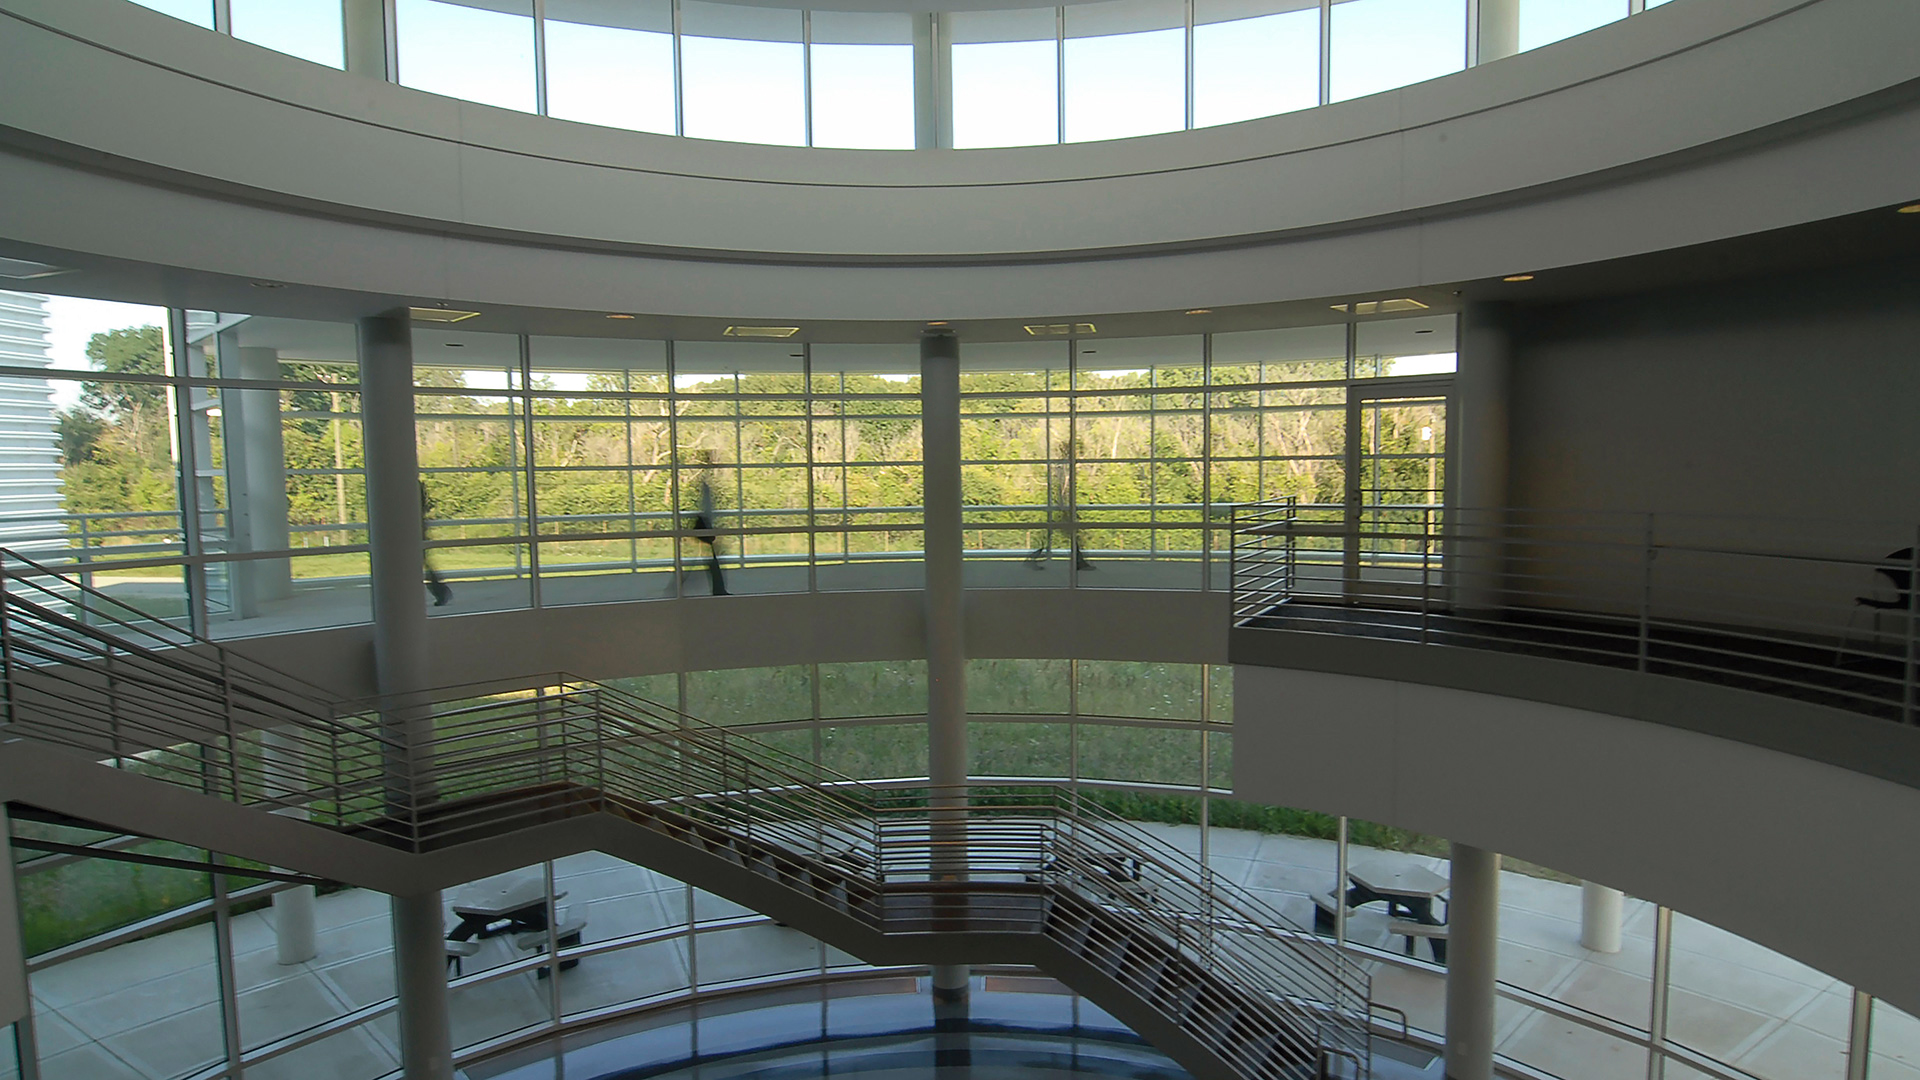 Blurred image of people walking through upper level of CNM atrium. Atrium has glass floor-to-ceiling glass walls, showing greenery of outdoors.